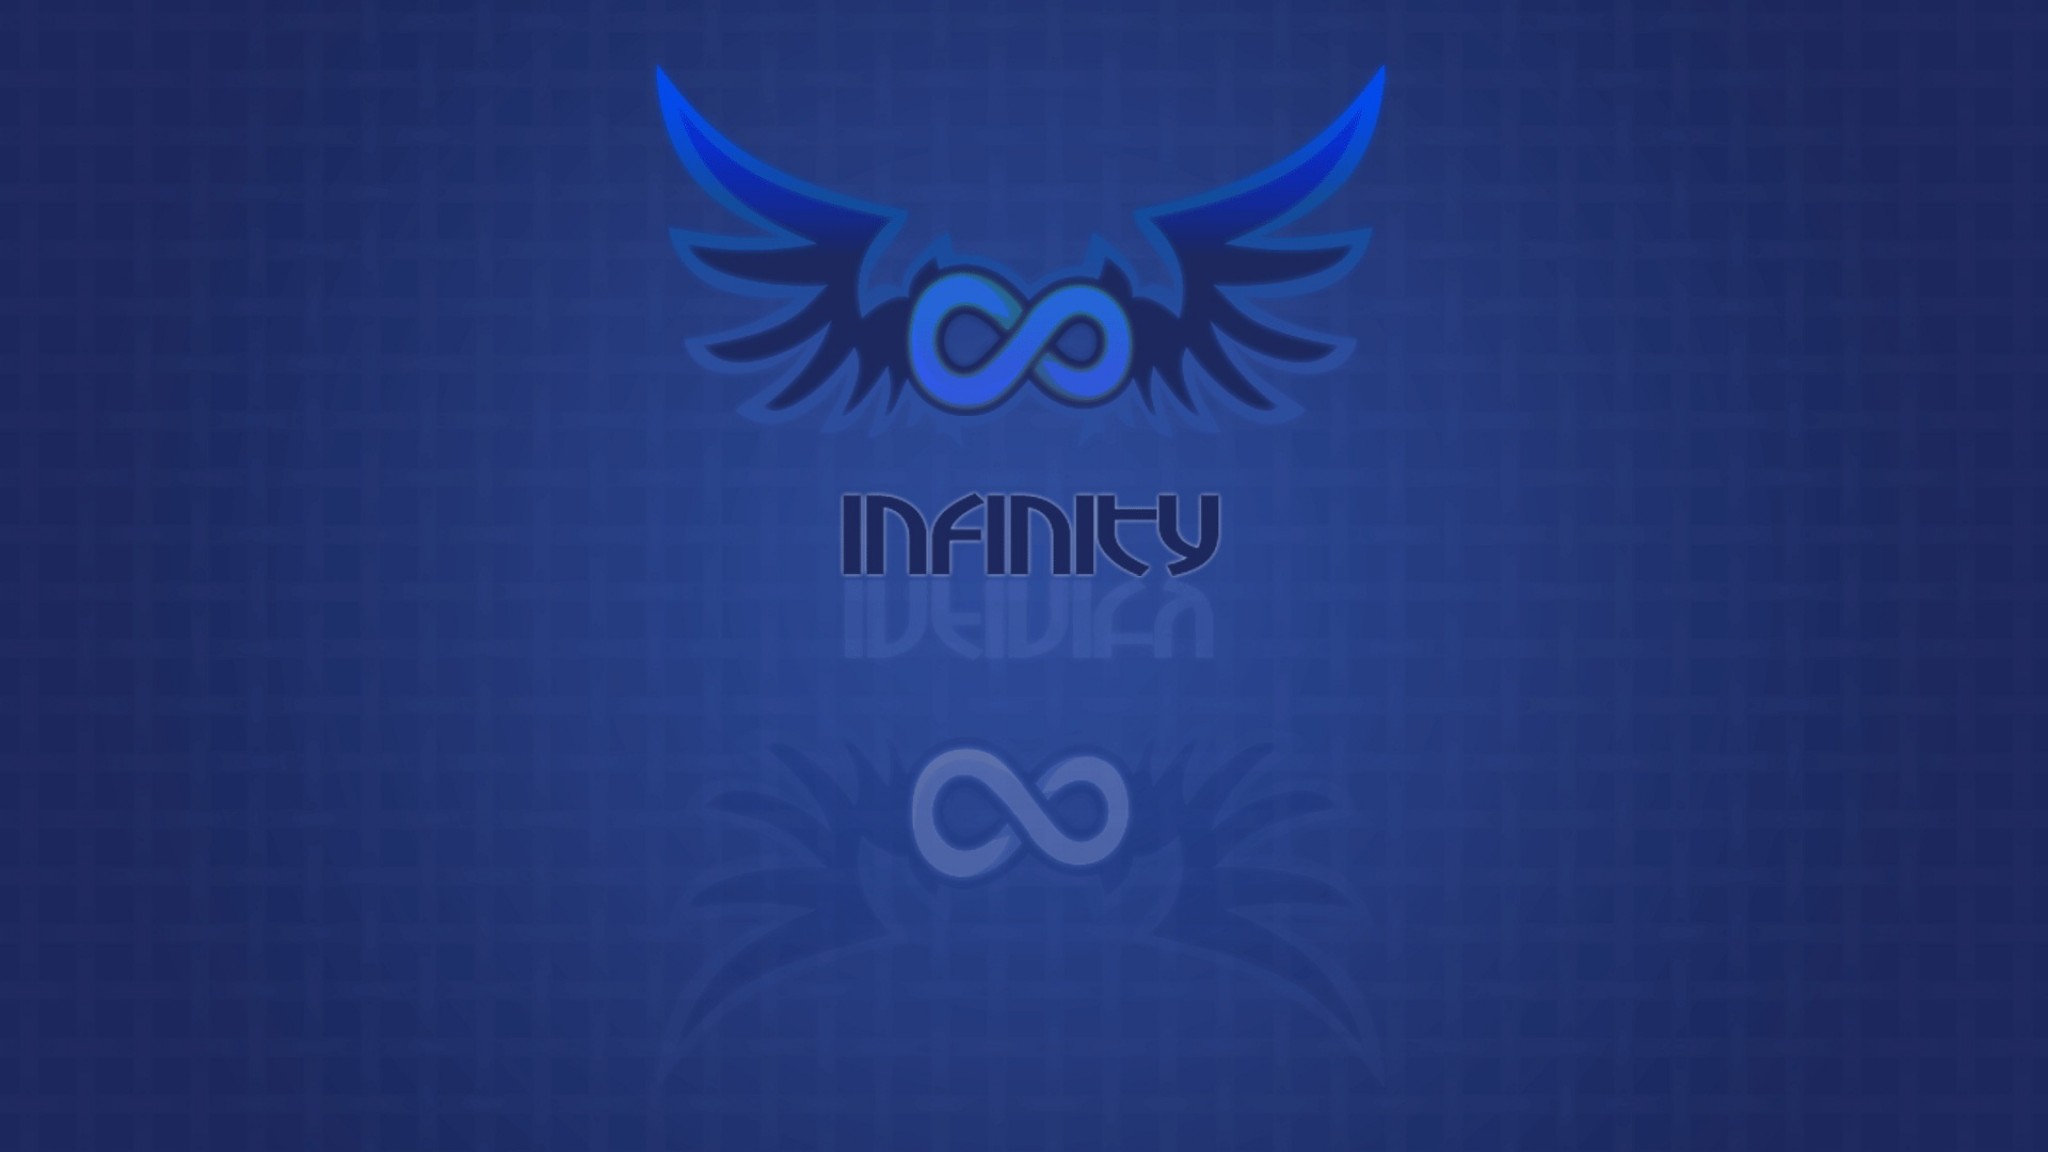 Infinity Sign Wallpaper Iphone - image #474